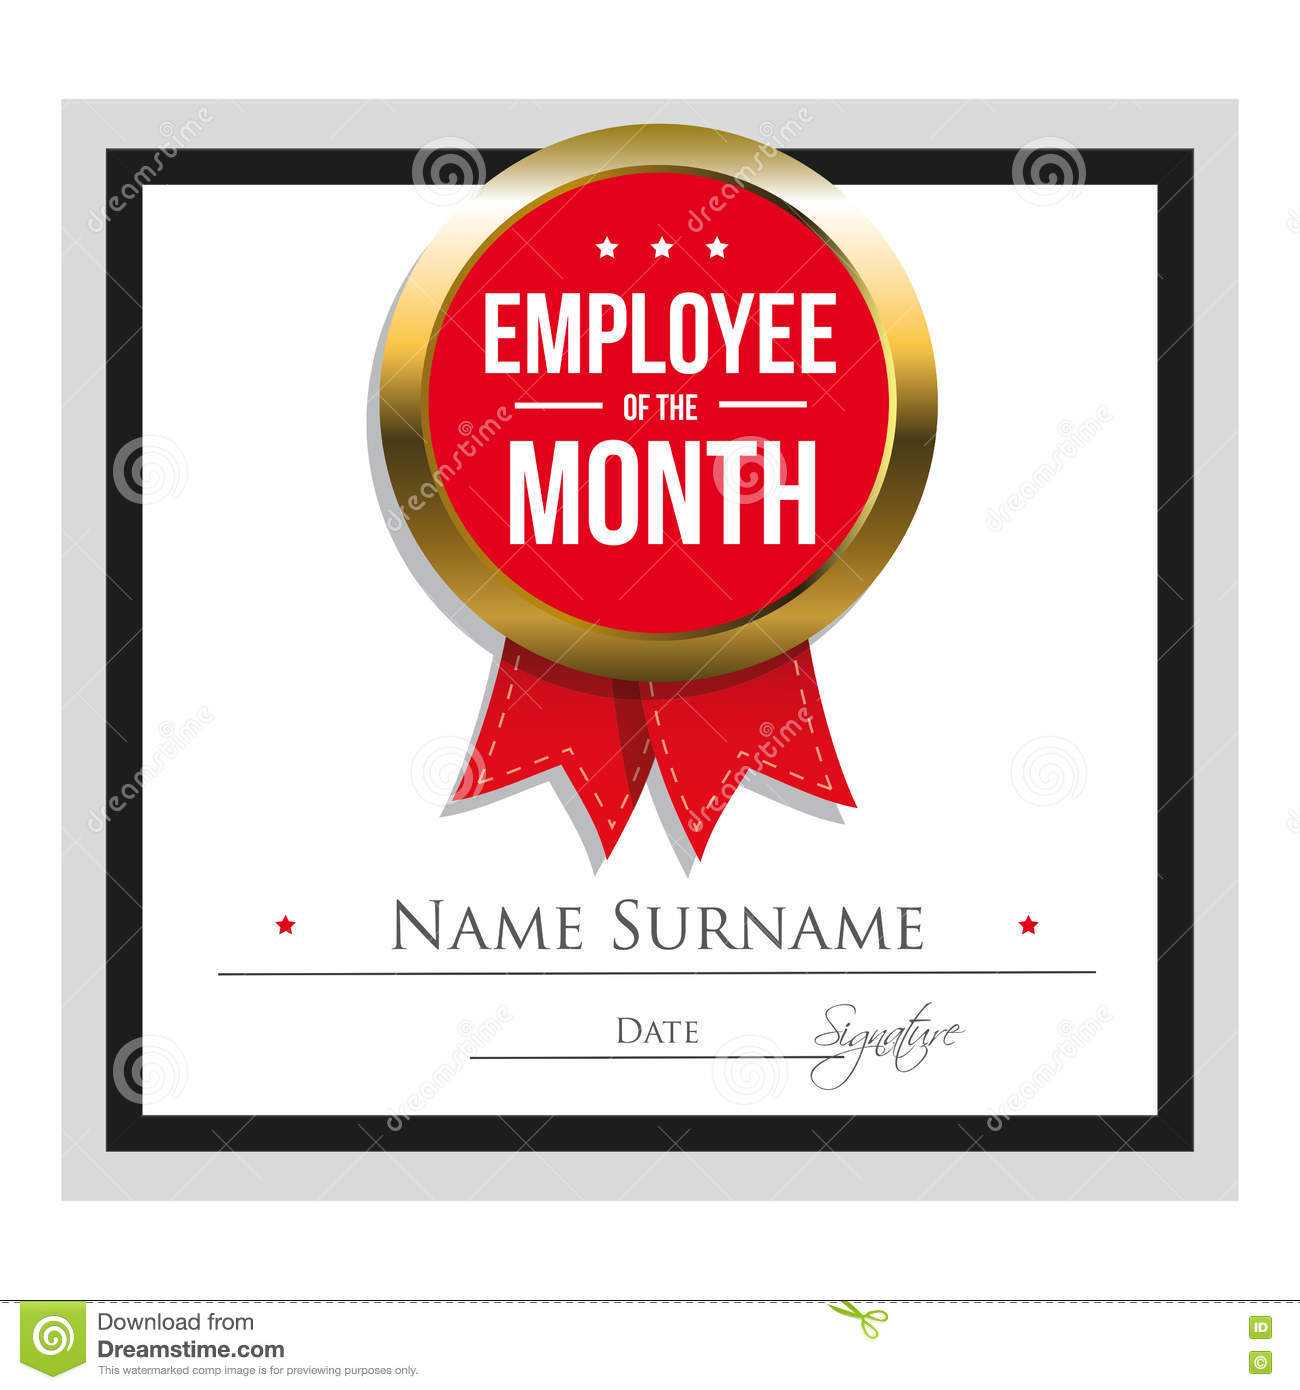 Employee Of The Month Certificate Template Stock Vector For Star Performer Certificate Templates